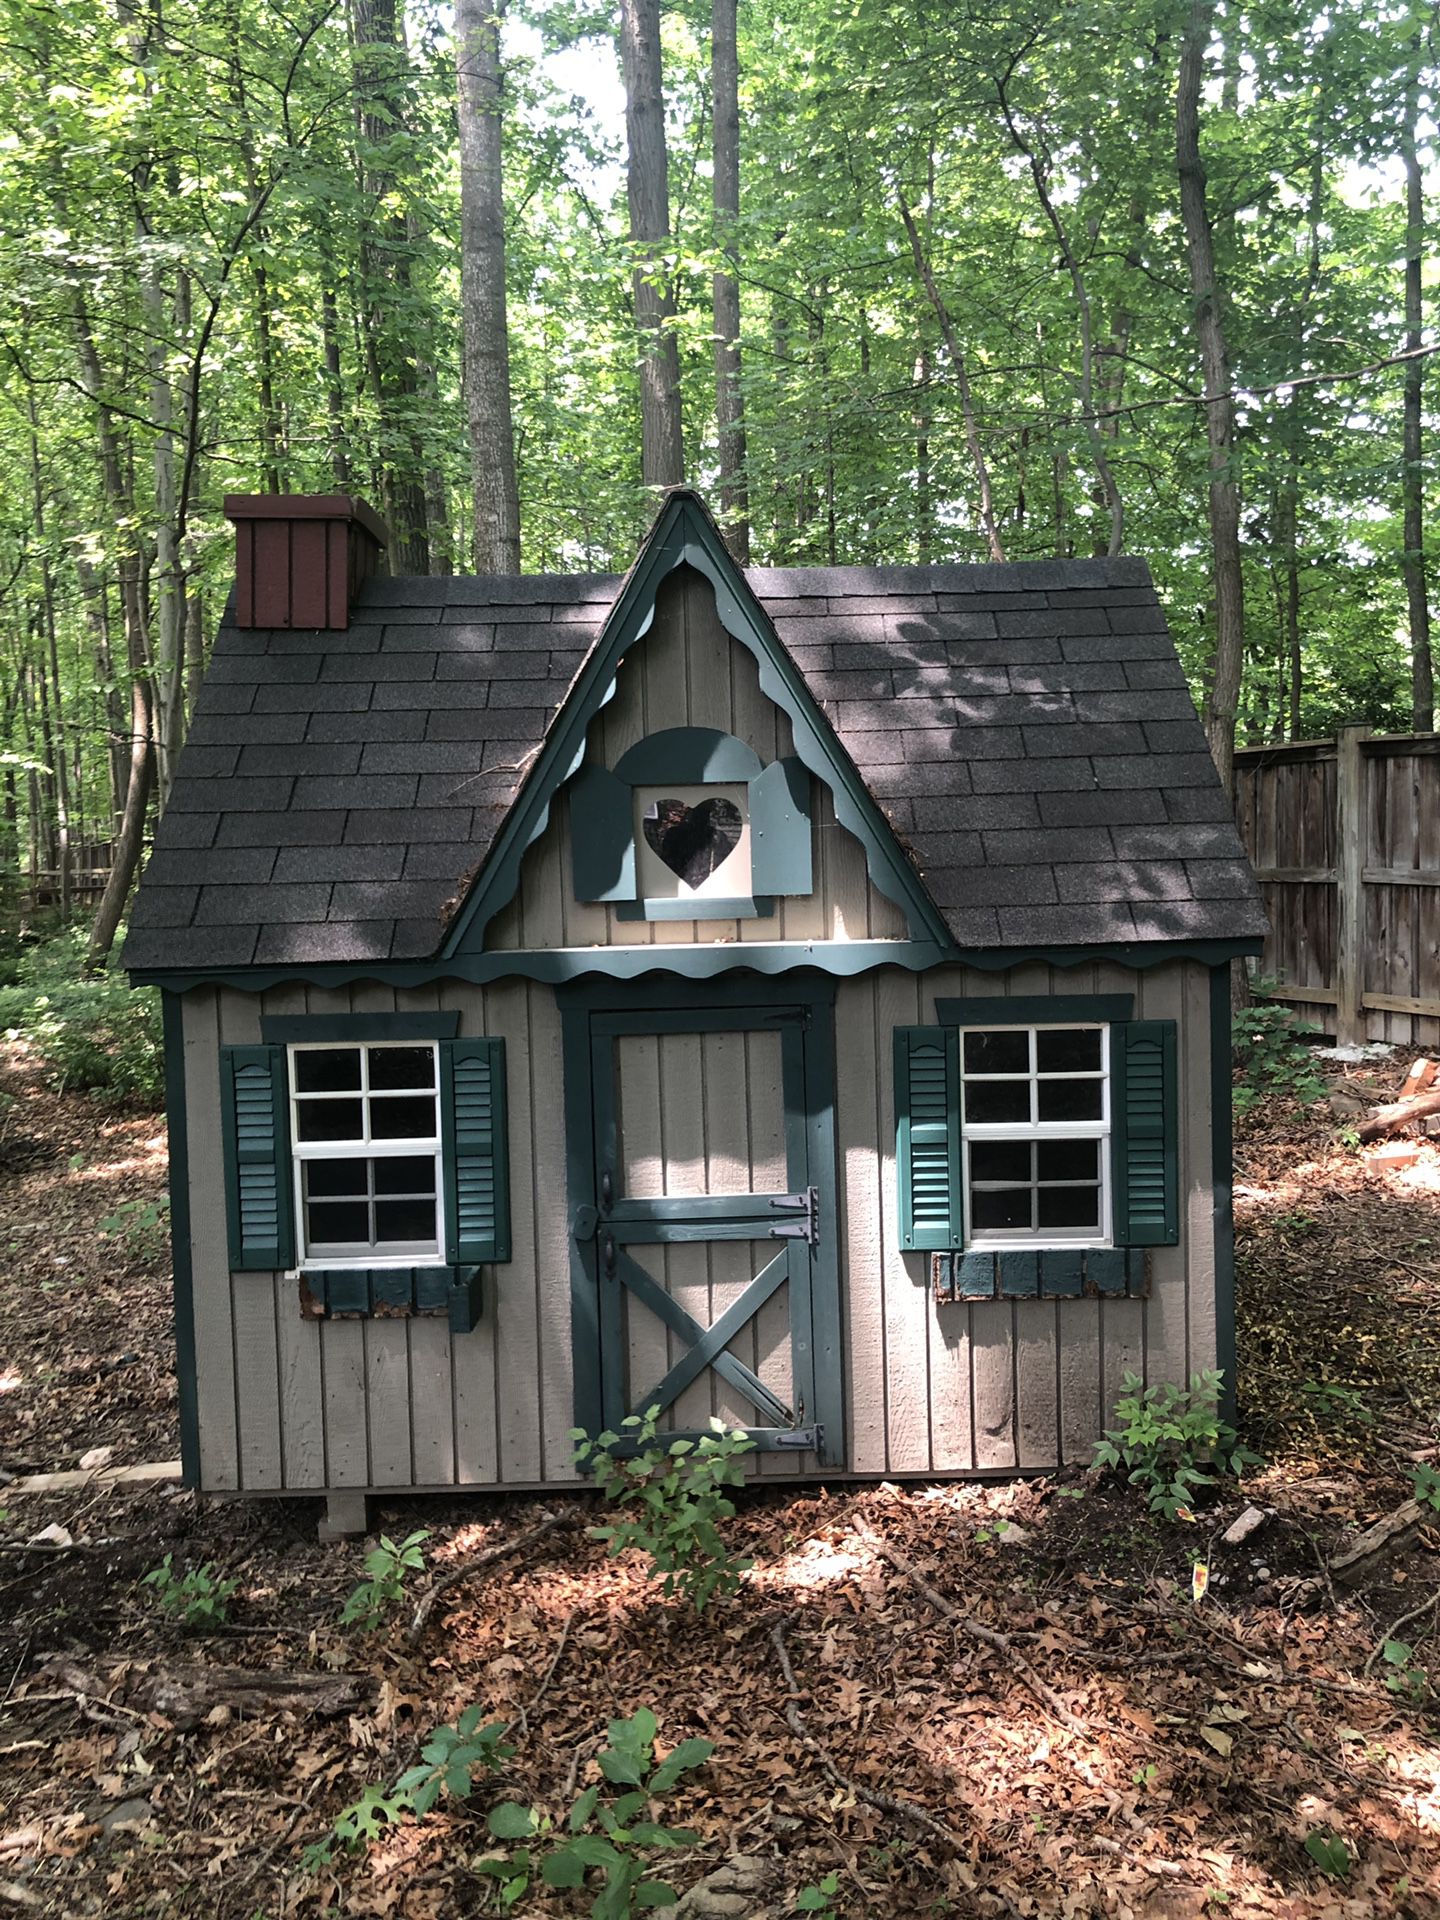 Outdoor Shed/Playhouse in Great Condition!